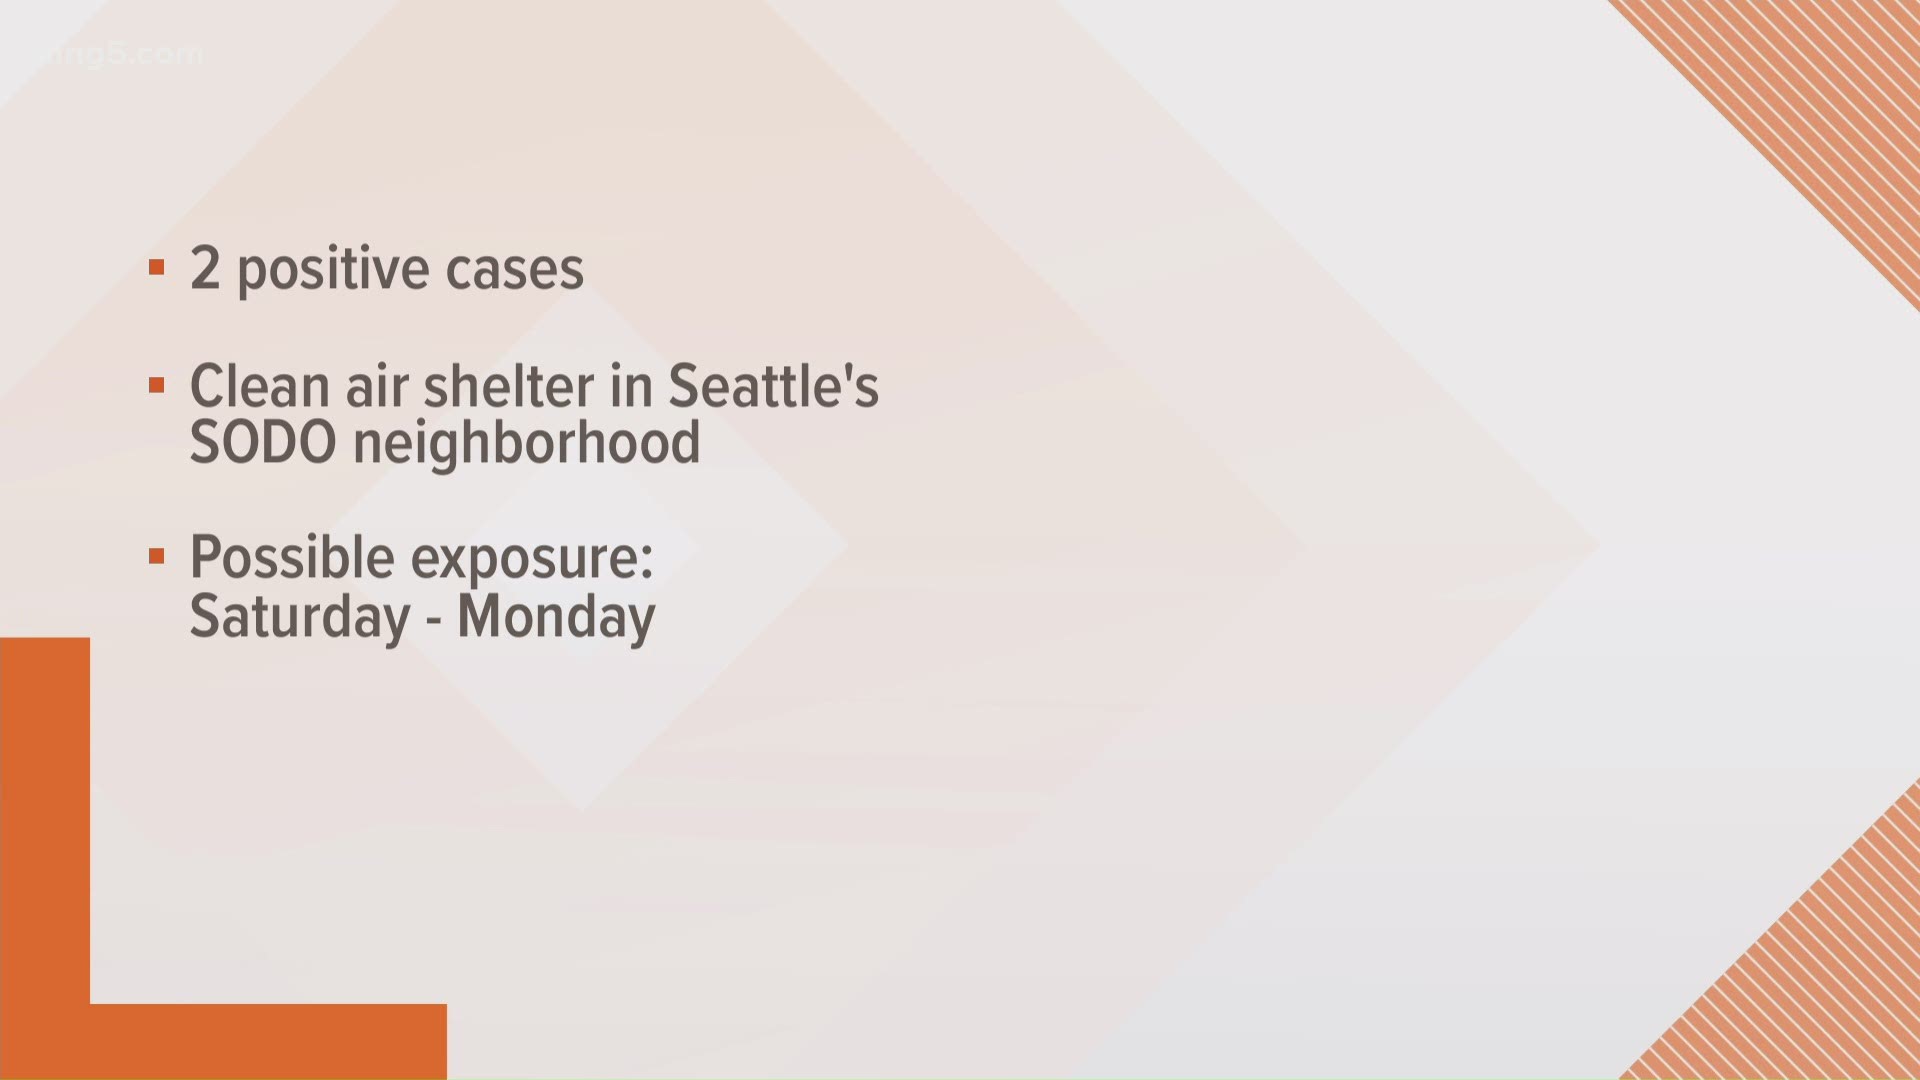 King County officials said two people who were staying at a temporary clean air shelter in Seattle have tested positive for COVID-19.